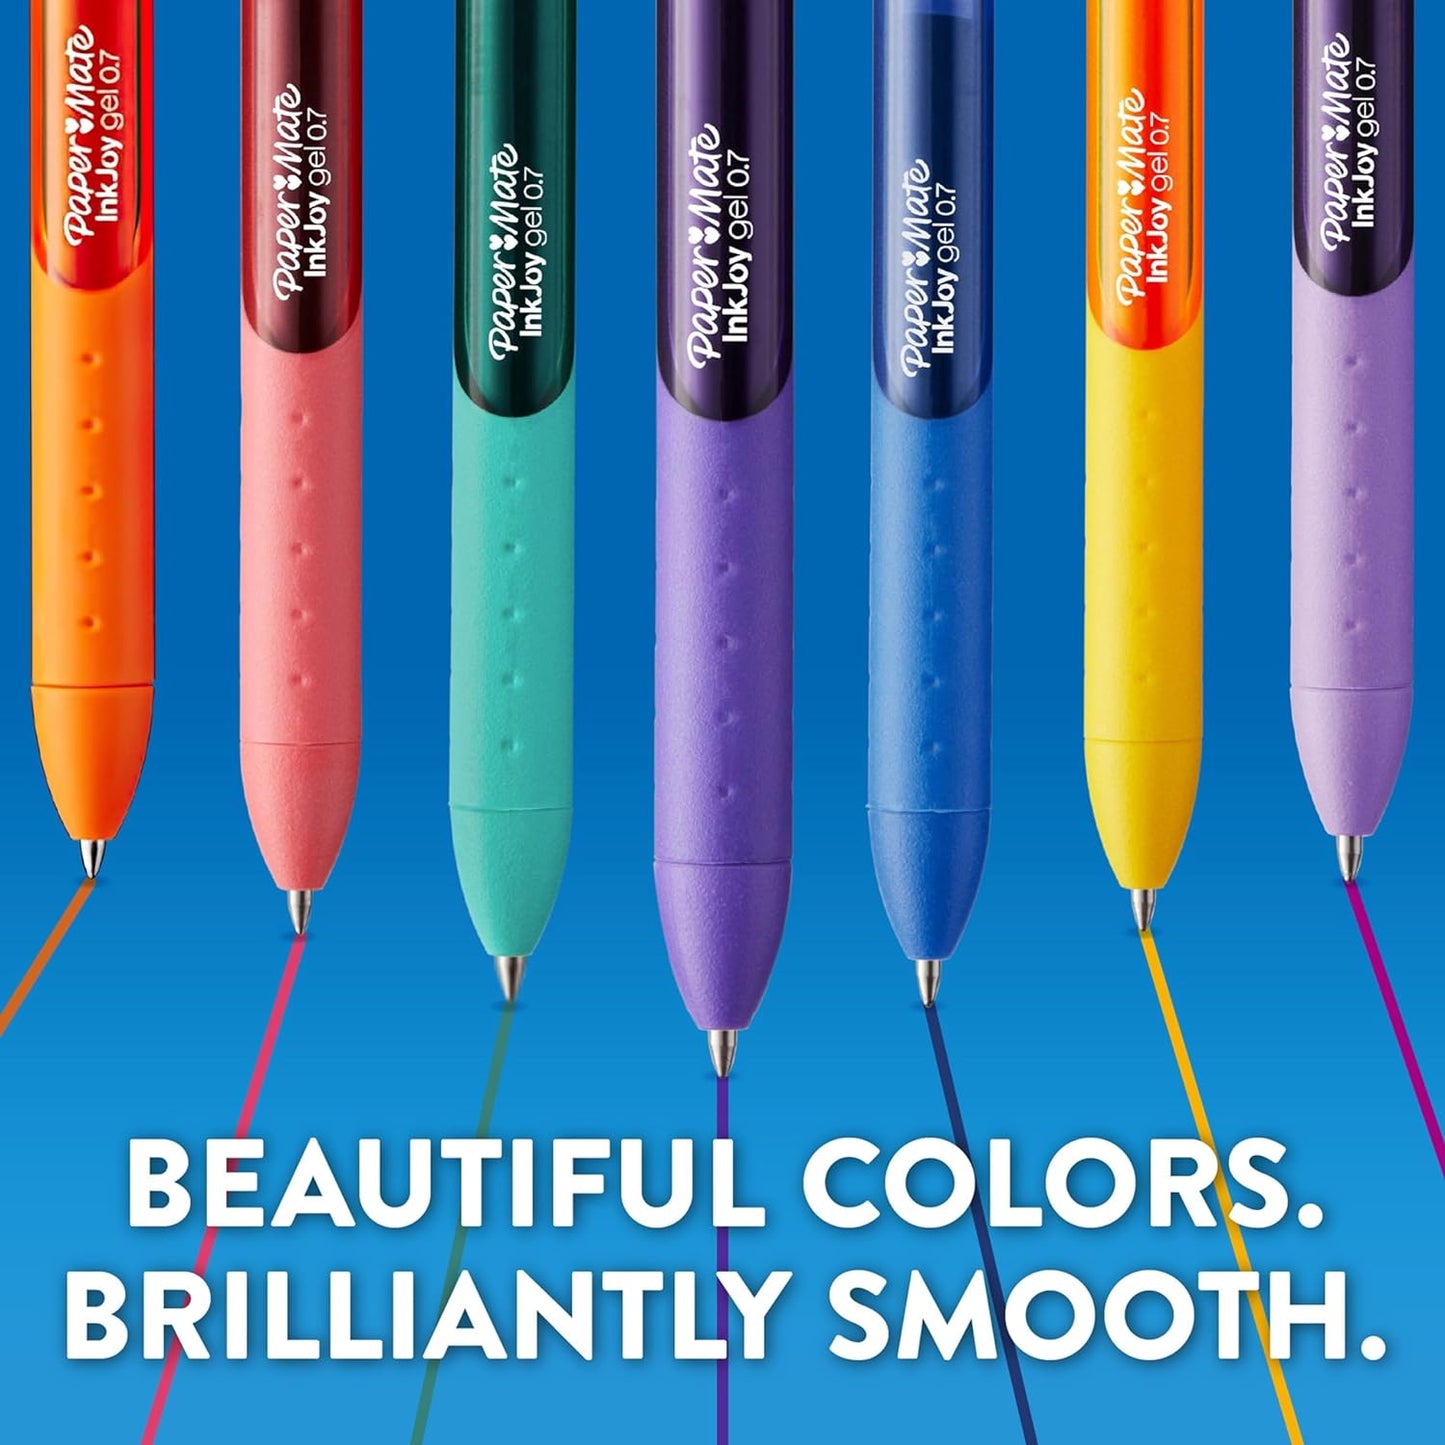 Colorful Gel Pens - Inkjoy Gel Pens, Assorted Medium Point (0.7). Perfect for Vibrant, Colored Writing and Sketching with  Inkjoy Gel Pens, 14 Count